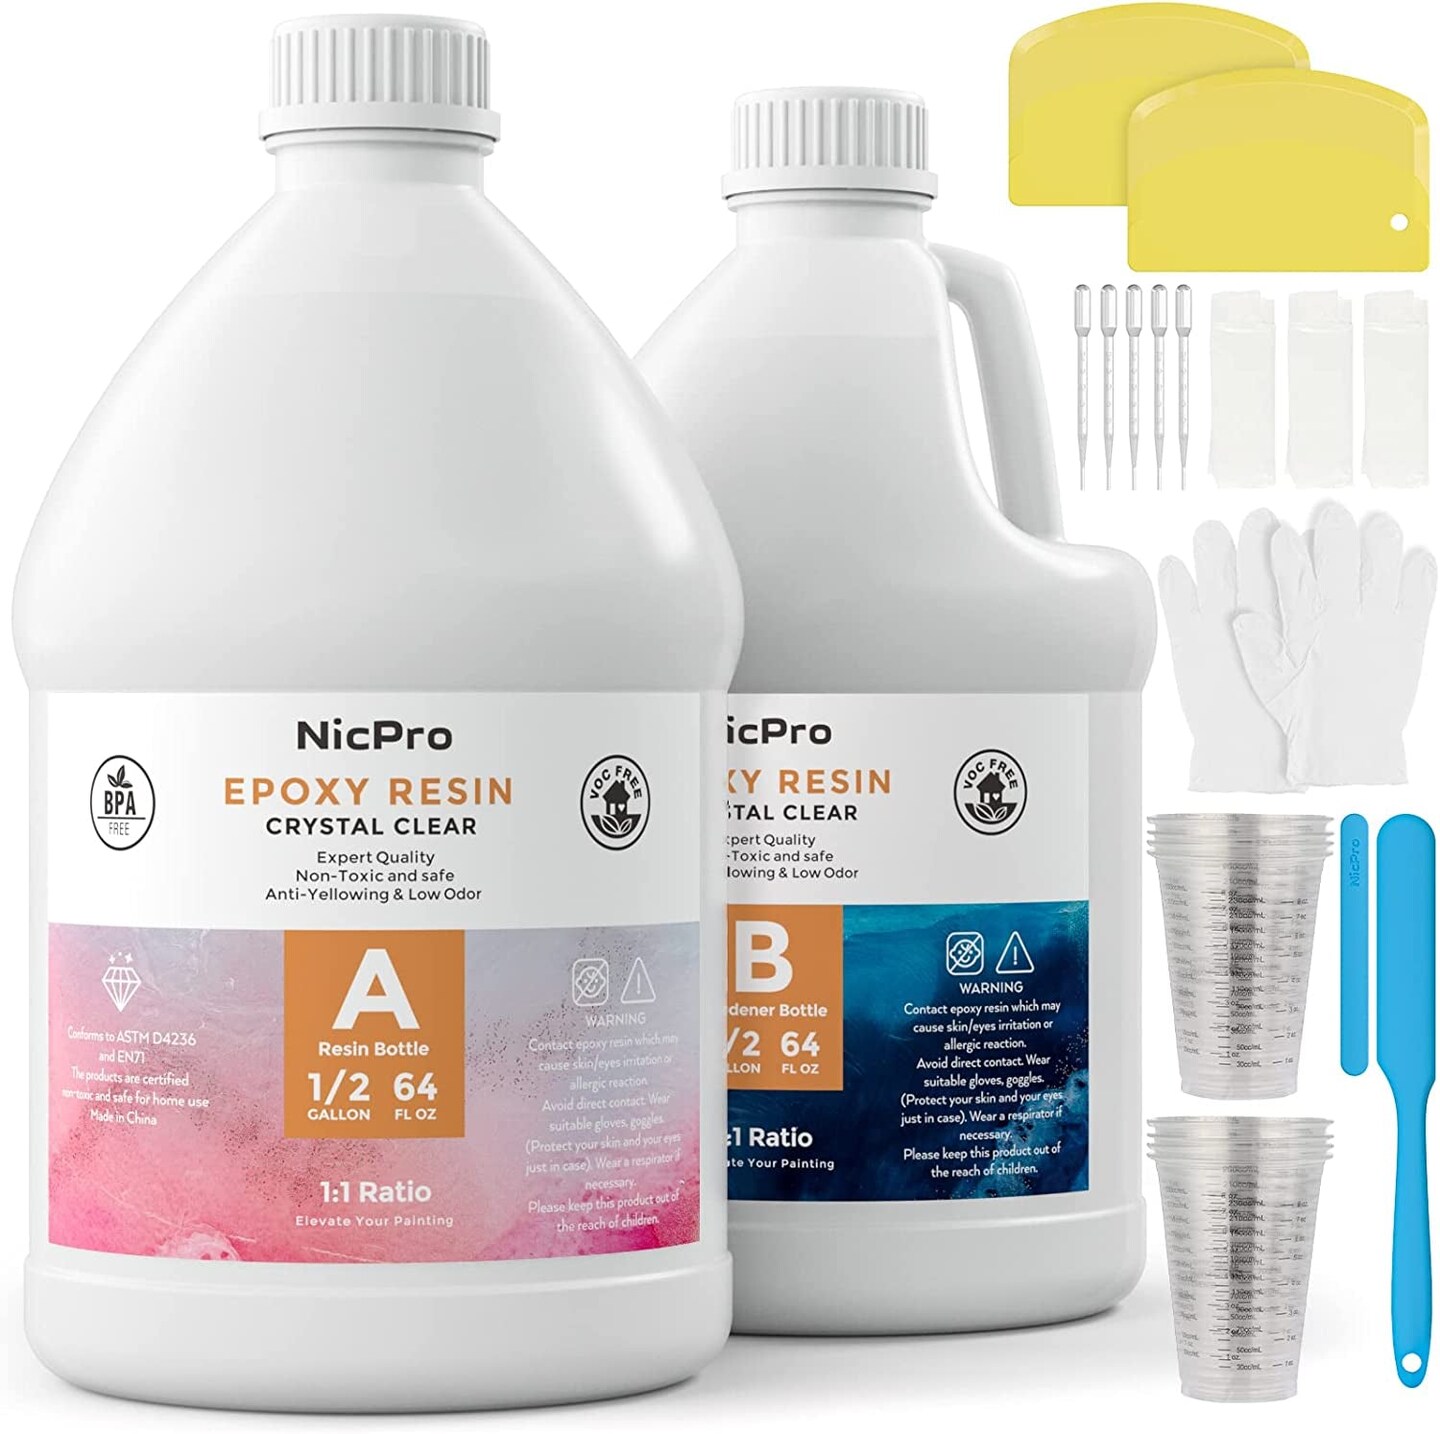 Nicpro 2 Gallon Epoxy Resin Kit, Crystal Clear, Self Leveling, Non-Toxic,  Ideal for Crafts, Jewelry Making, Cures in 8-24 Hours